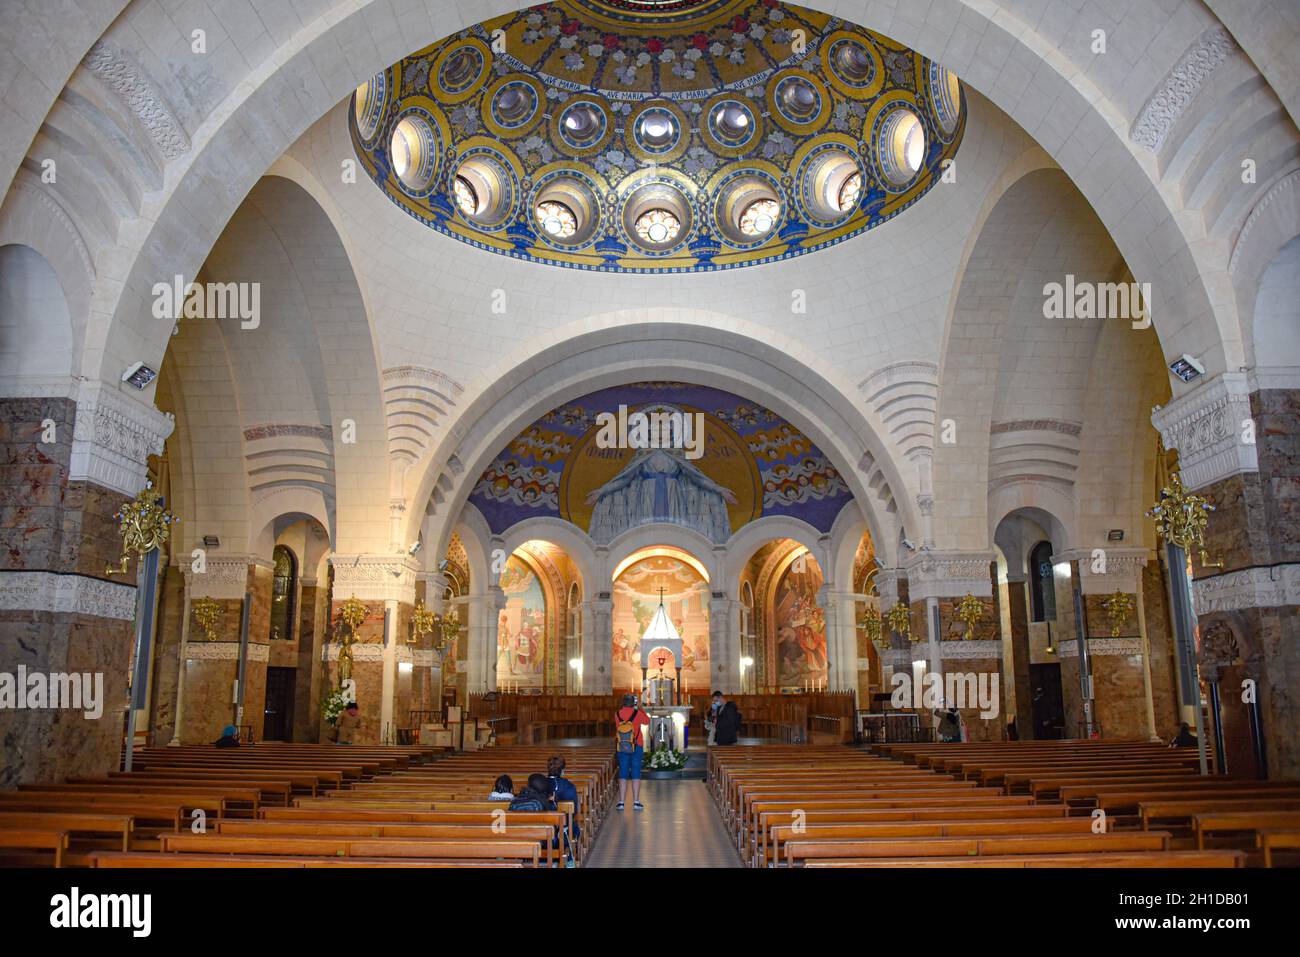 Lourdes, France - 9 Oct, 2021: Interior views of the Basilica Sanctuary of Our Lady of Lourdes Stock Photo